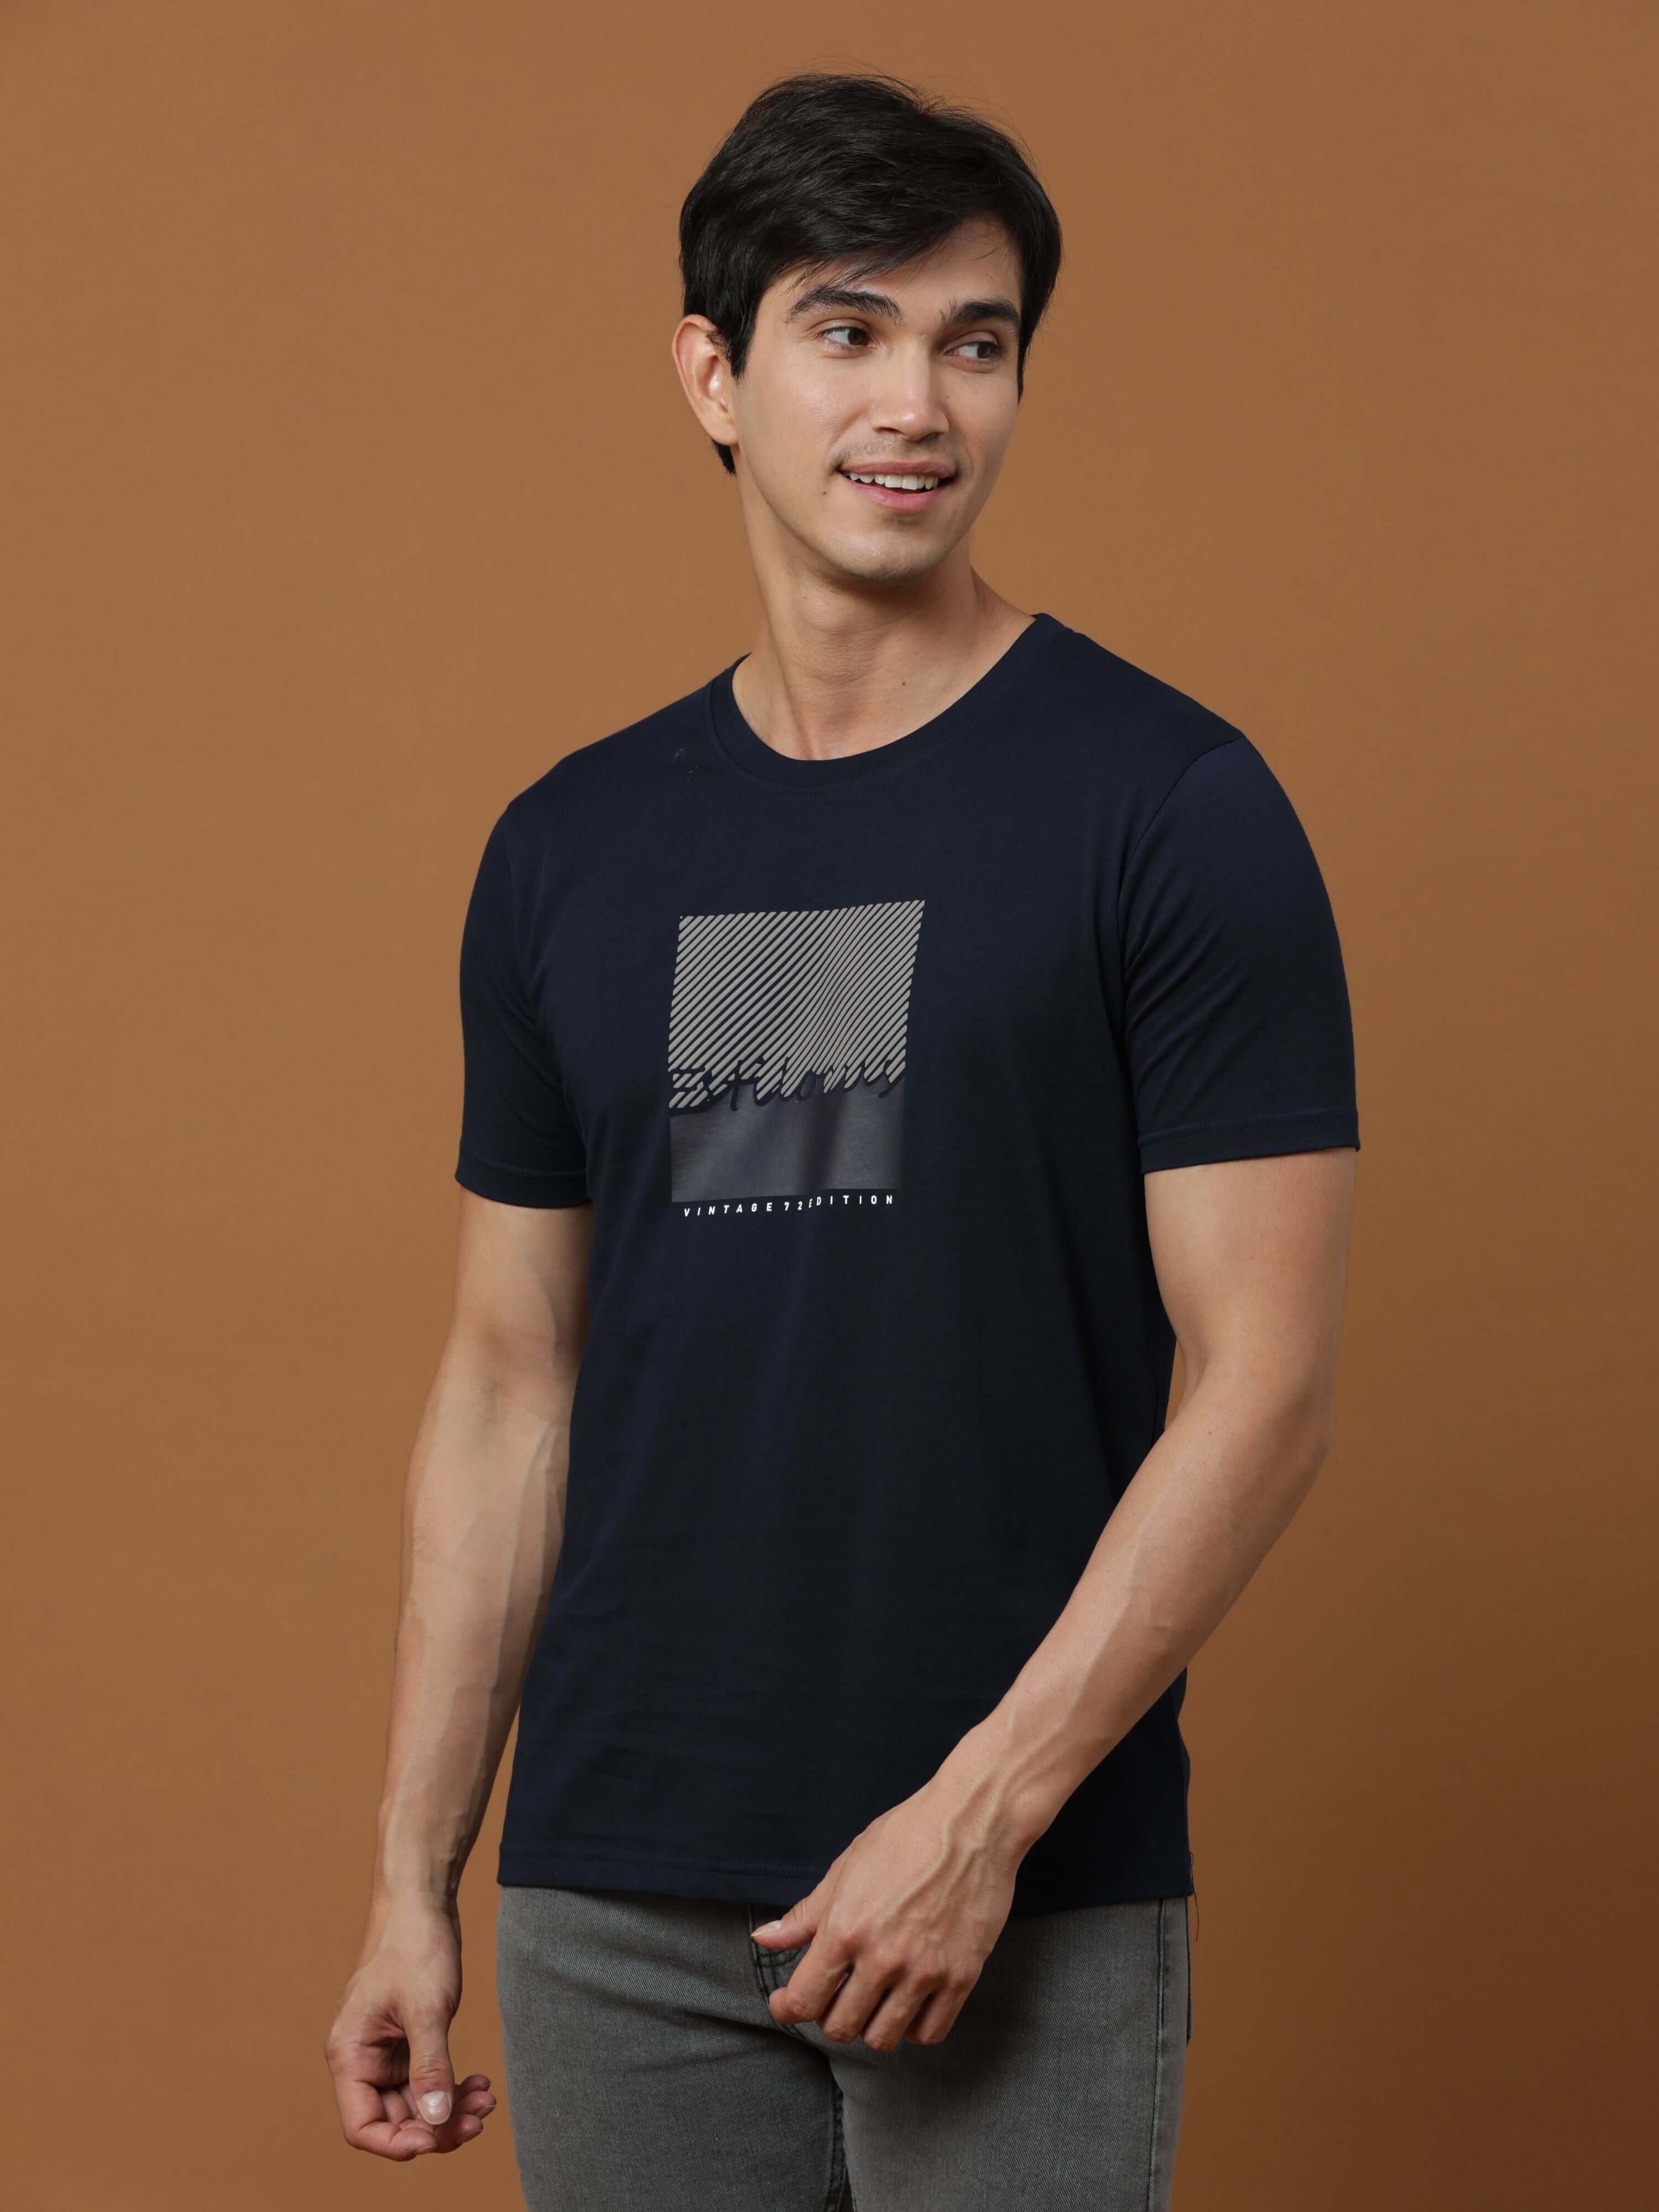 Navy Vintage 72 Edition T Shirt shop online at Estilocus. 100% Cotton Designed and printed on knitted fabric. The fabric is stretchy and lightweight, with a soft skin feel and no wrinkles. Crew neck collar which is smooth on the neck and keeps you comfort